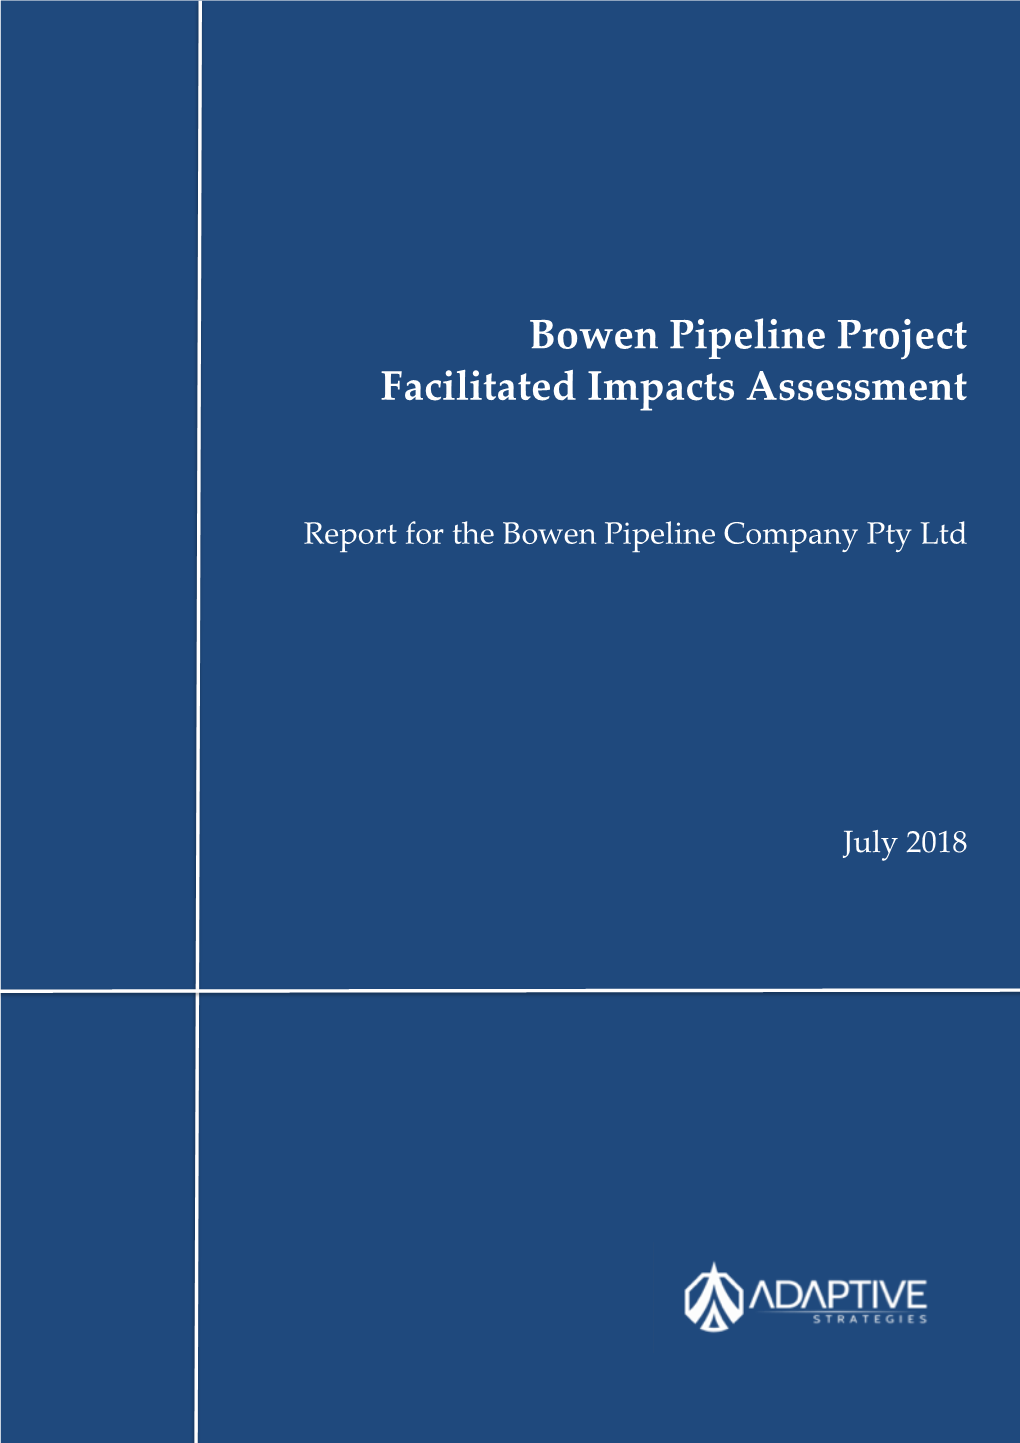 Bowen Pipeline Project Facilitated Impacts Assessment